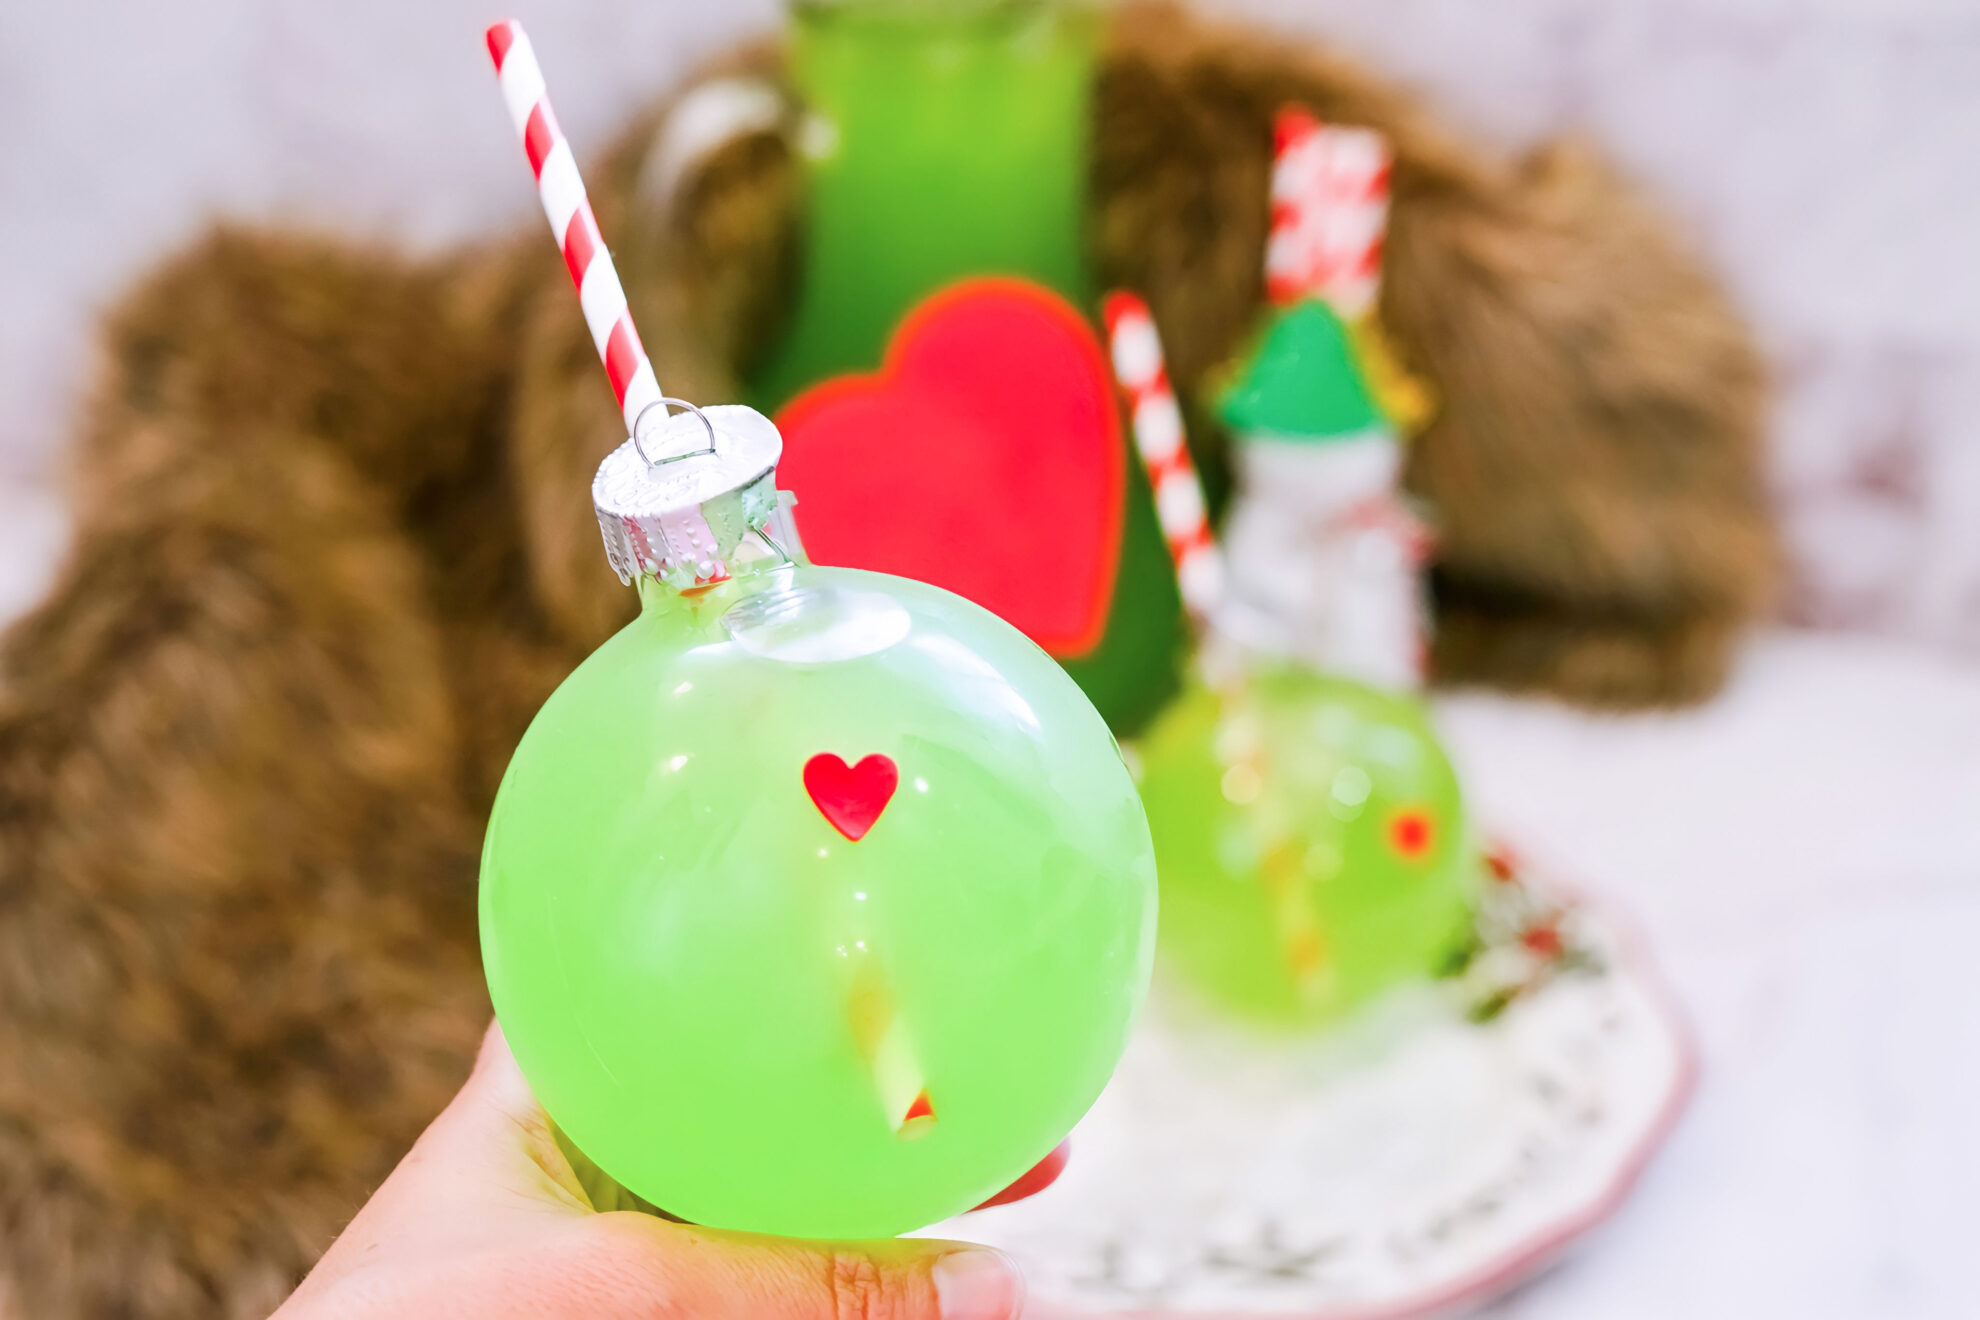 https://thriftyjinxy.com/wp-content/uploads/2022/12/Grinch-Punch-in-ornament-with-straw.jpg